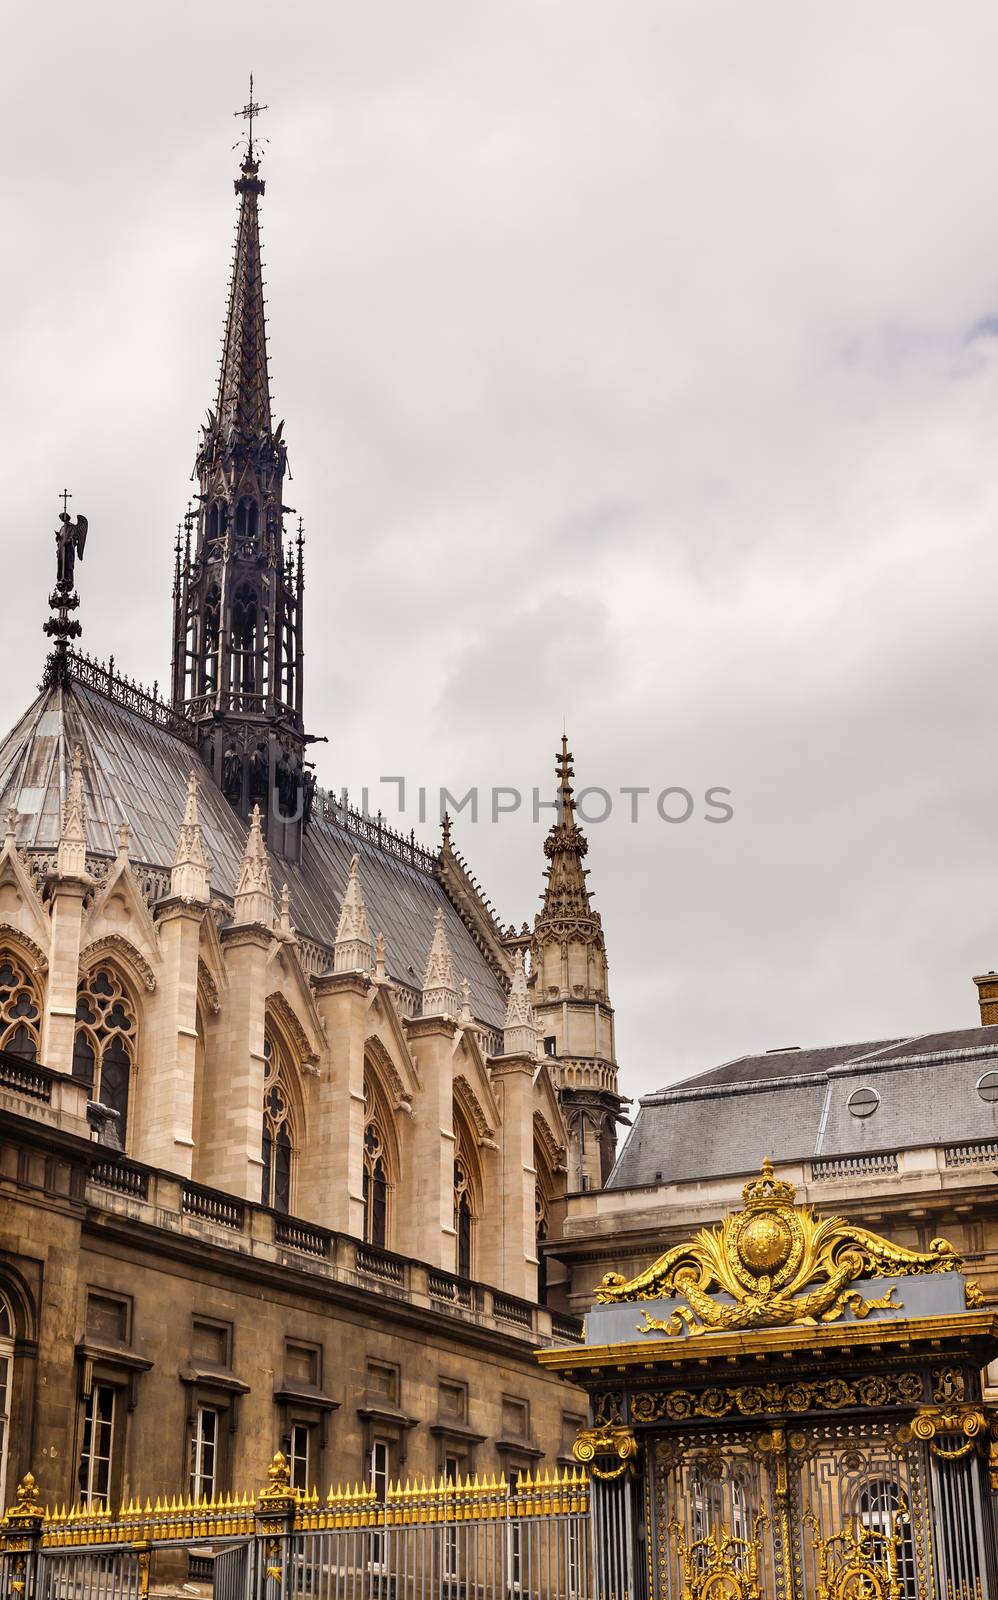 Cathedral Spires Saint Chapelle Golden Gate Palace of Justice Court Paris France.  Saint King Louis 9th created Sainte Chappel in 1248 to house Christian relics, including Christ's Crown of Thorns. 